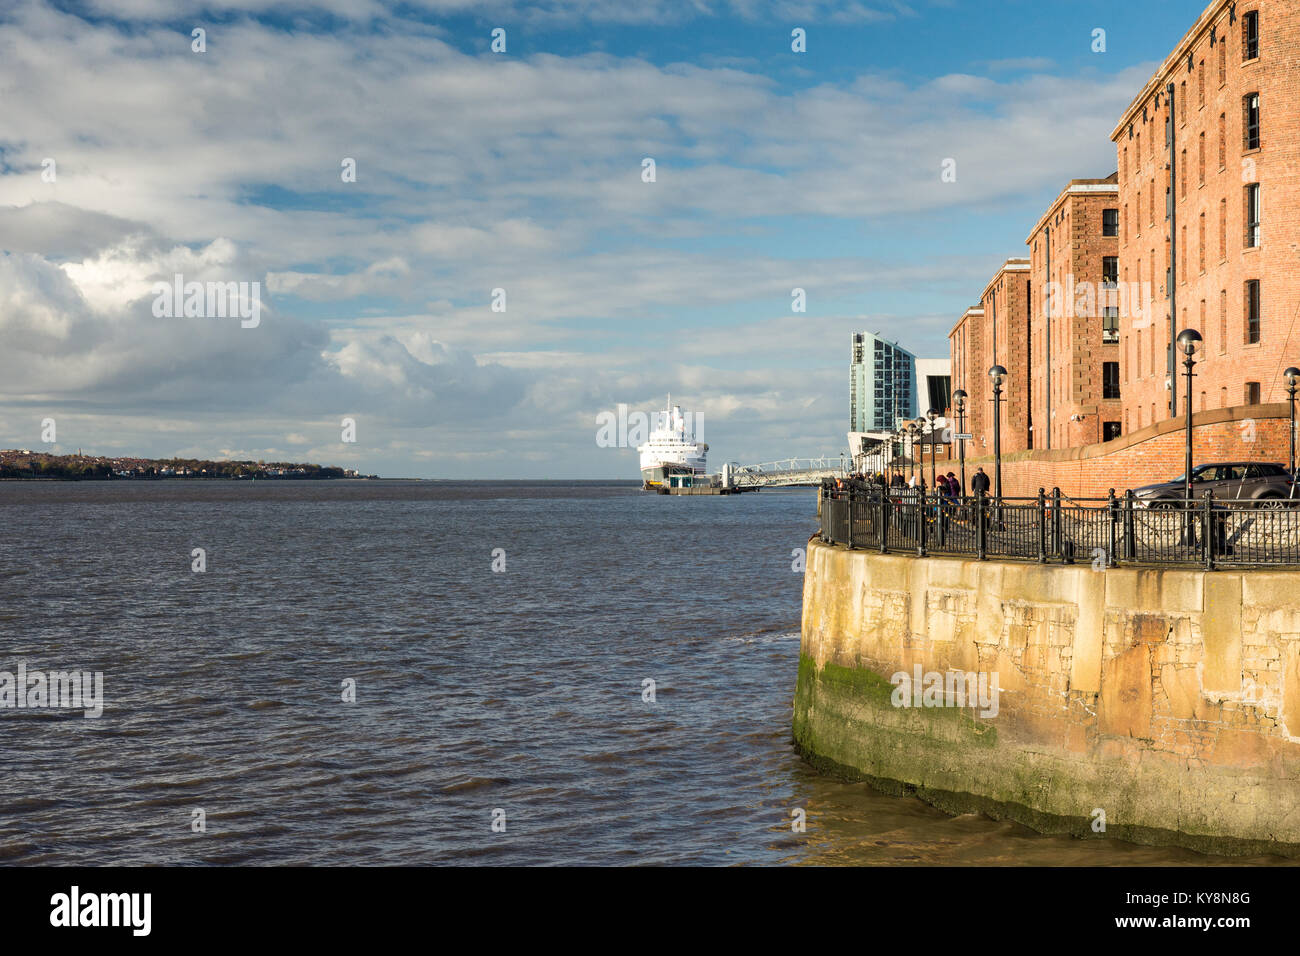 Liverpool, England, UK - November 11, 2016: Sun shines on the redeveloped Albert Dock warehouses in Liverpool's historic docks, with a cruise ship doc Stock Photo